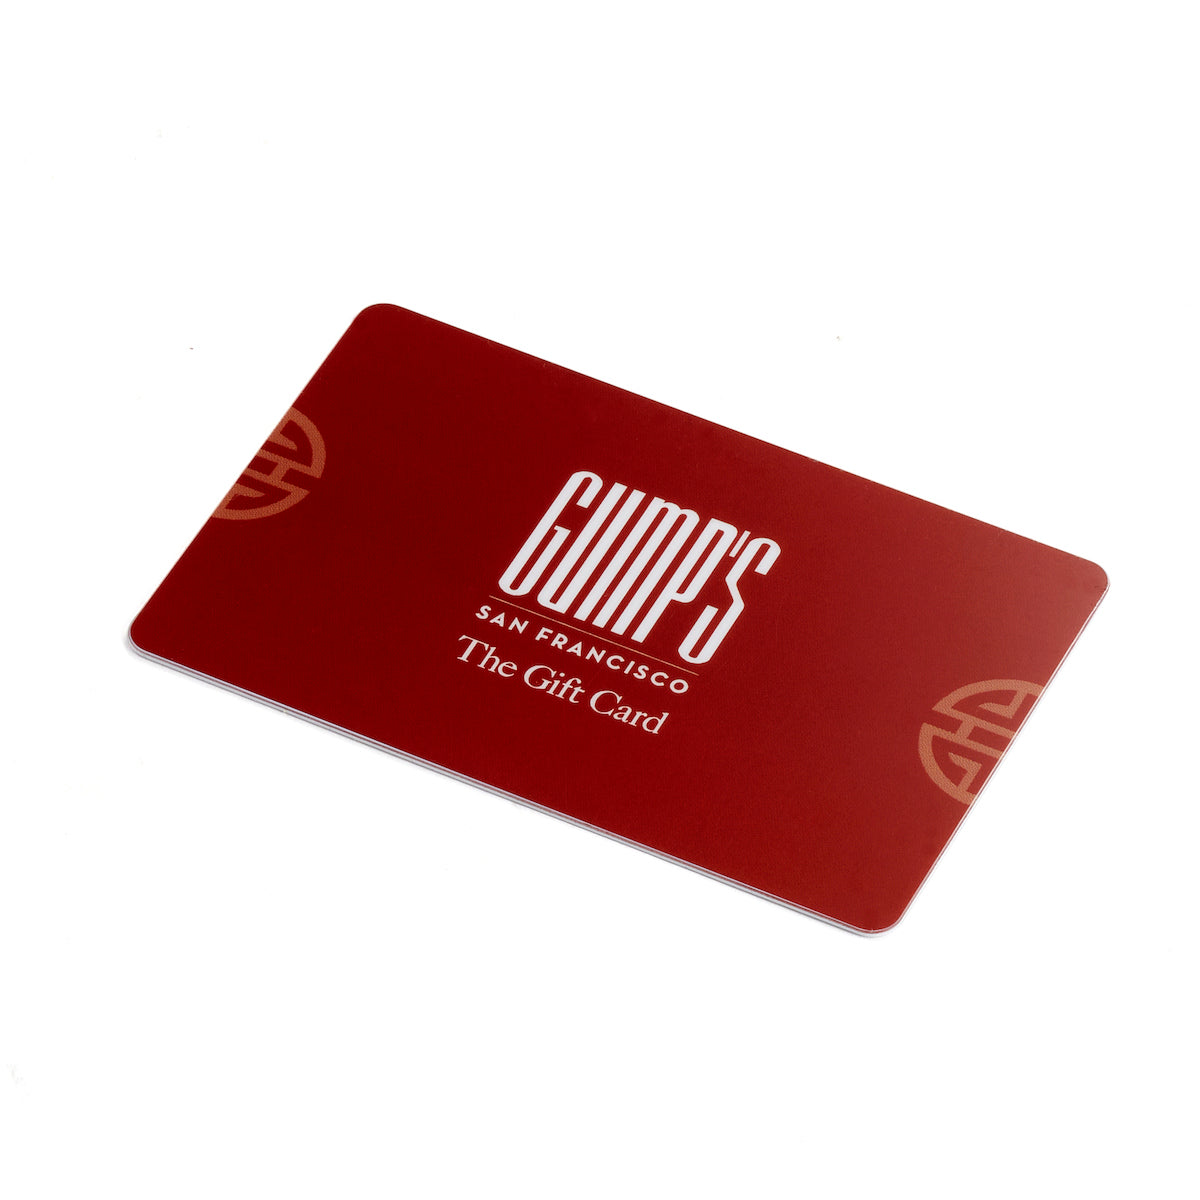 The Gump's Gift Card $50